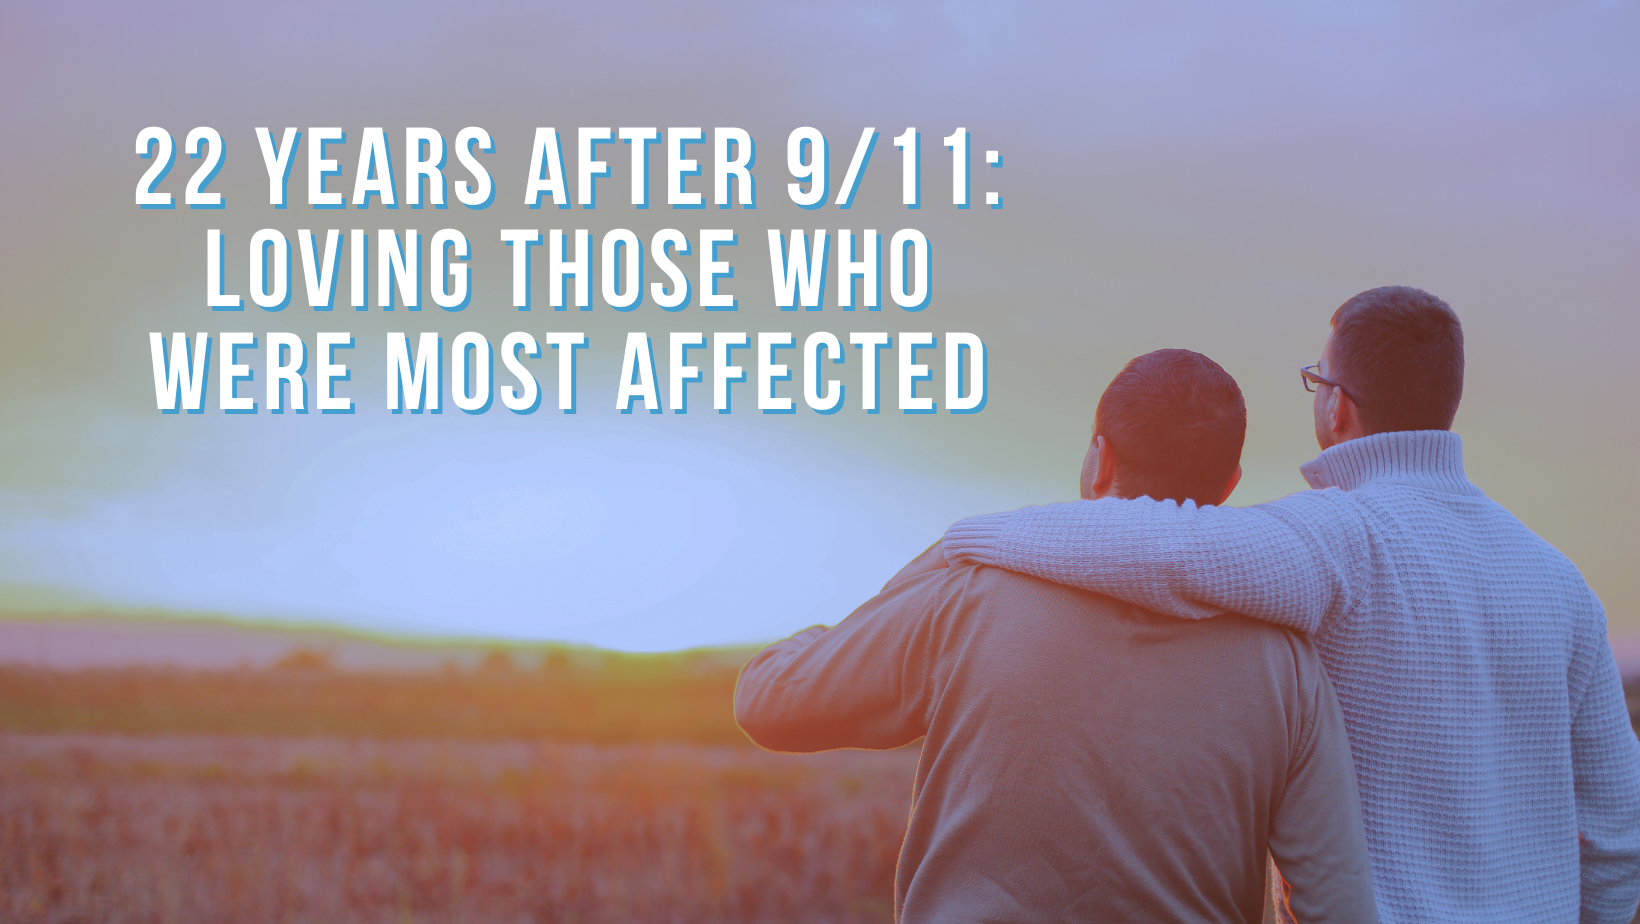 22 years after 9/11: Loving those who were most affected